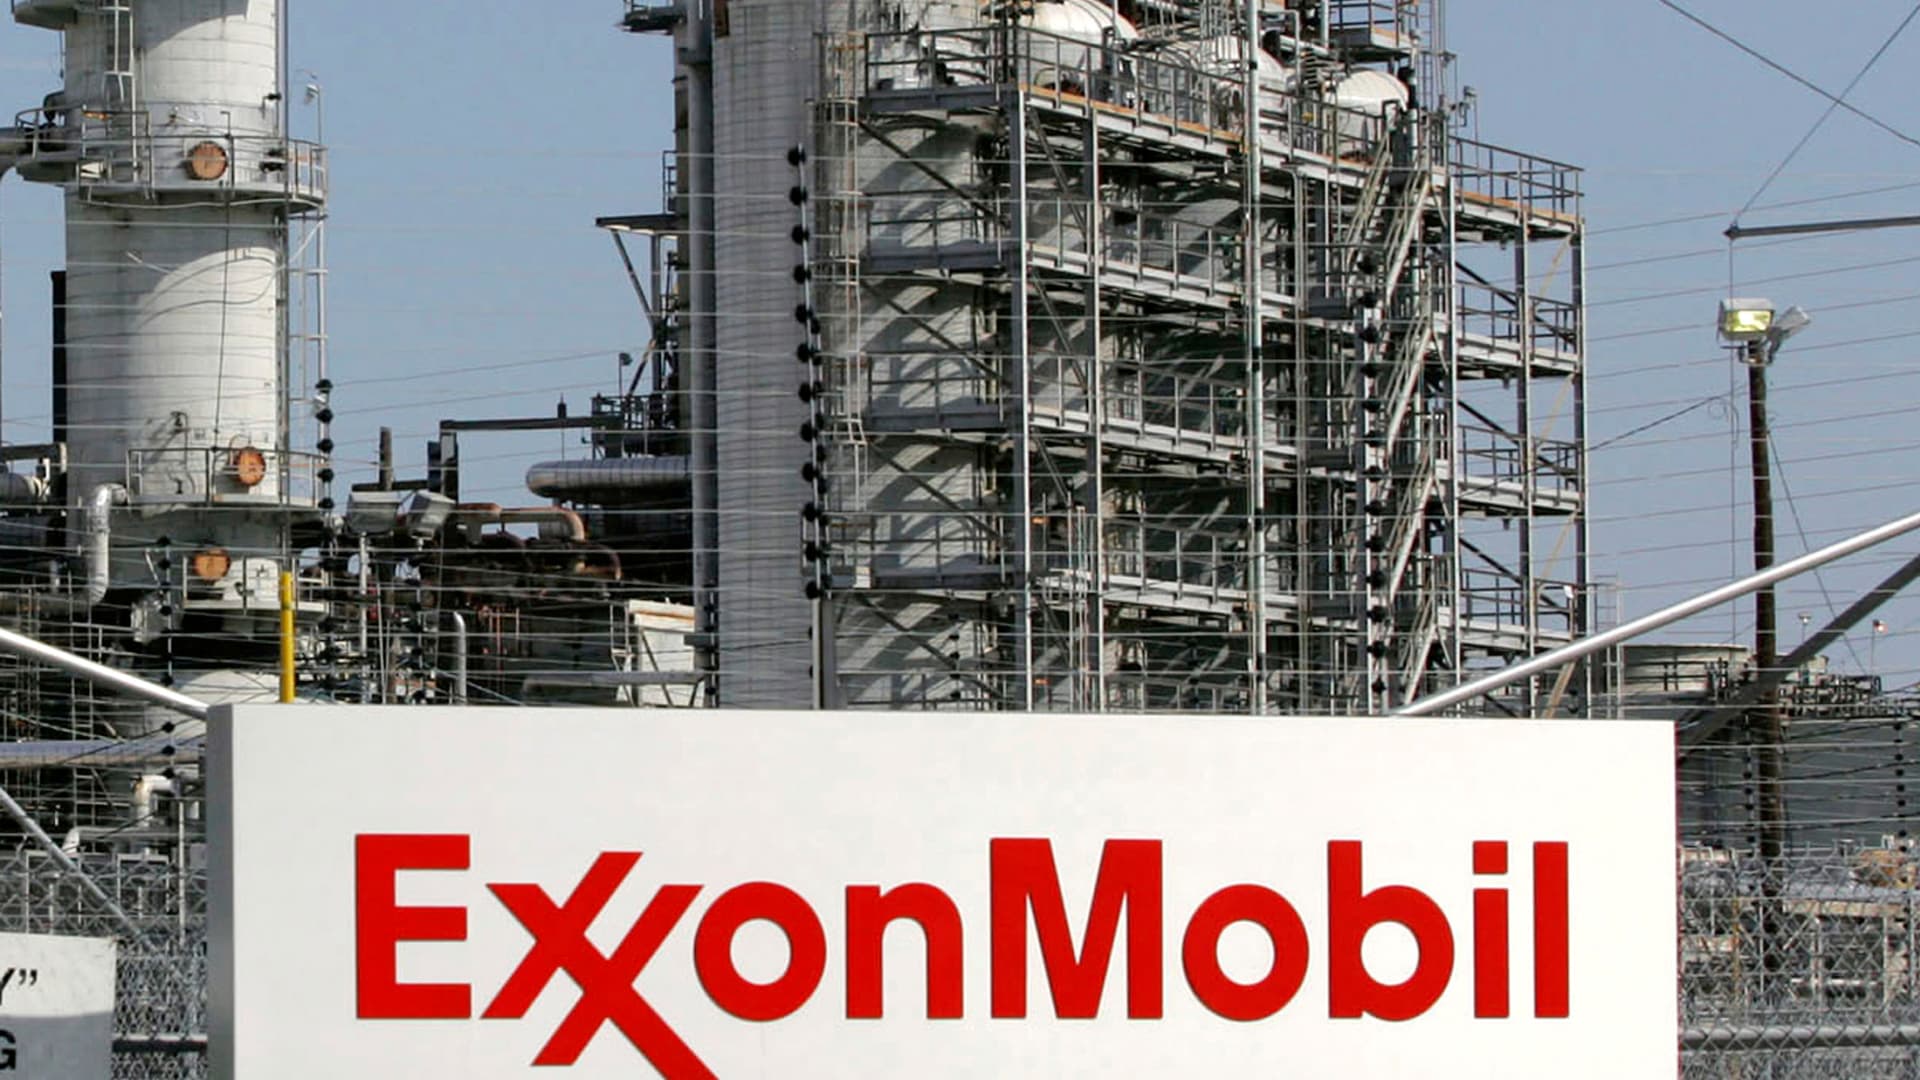 Exxon Mobil reaches agreement with FTC, poised to close $60 billion Pioneer deal